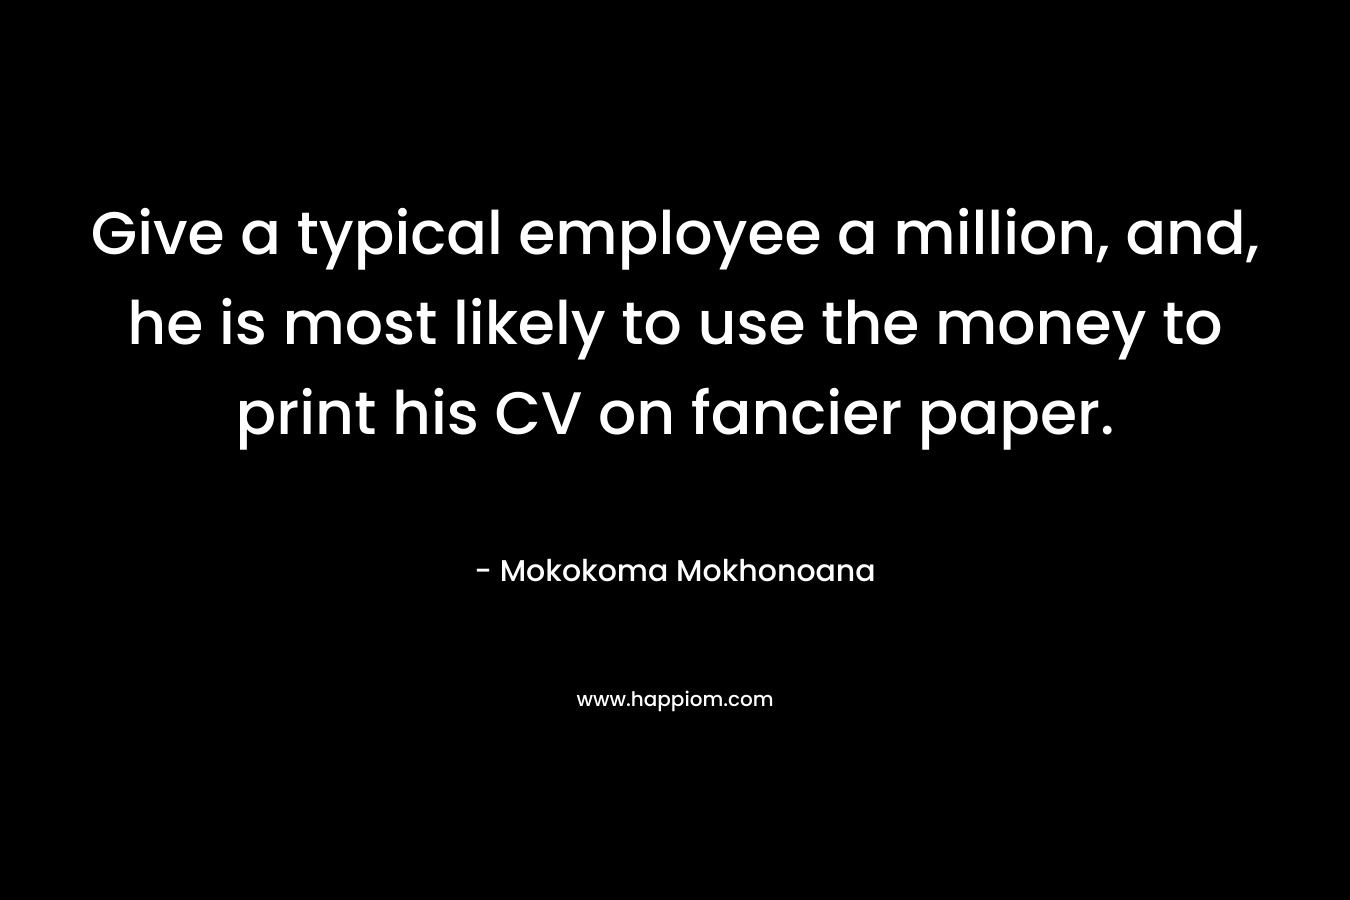 Give a typical employee a million, and, he is most likely to use the money to print his CV on fancier paper. – Mokokoma Mokhonoana